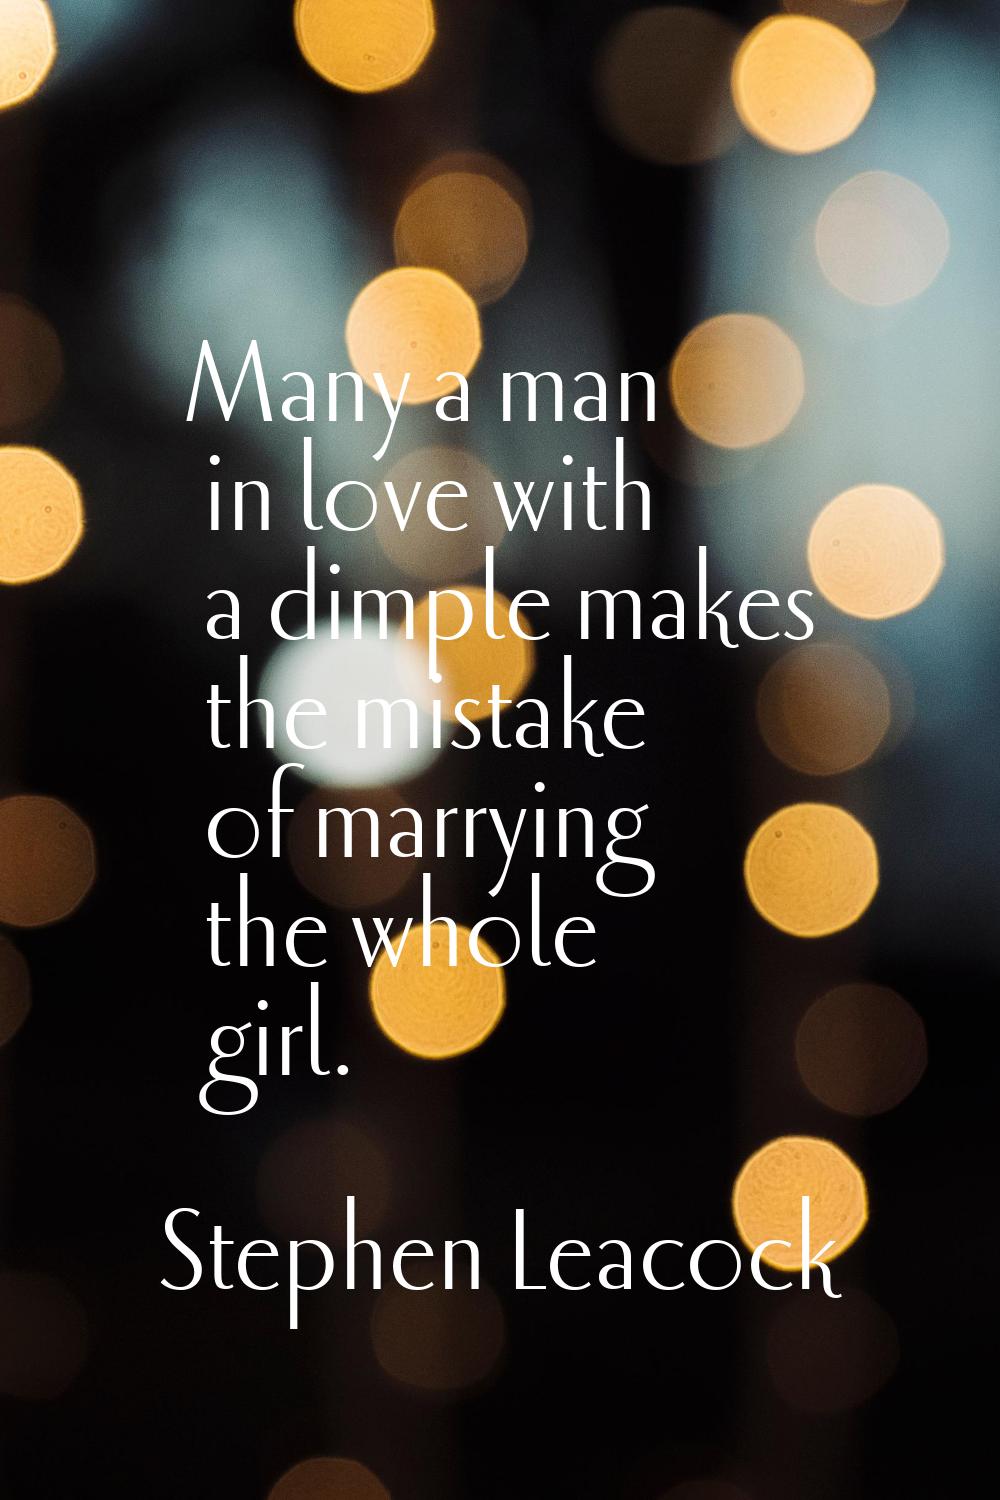 Many a man in love with a dimple makes the mistake of marrying the whole girl.